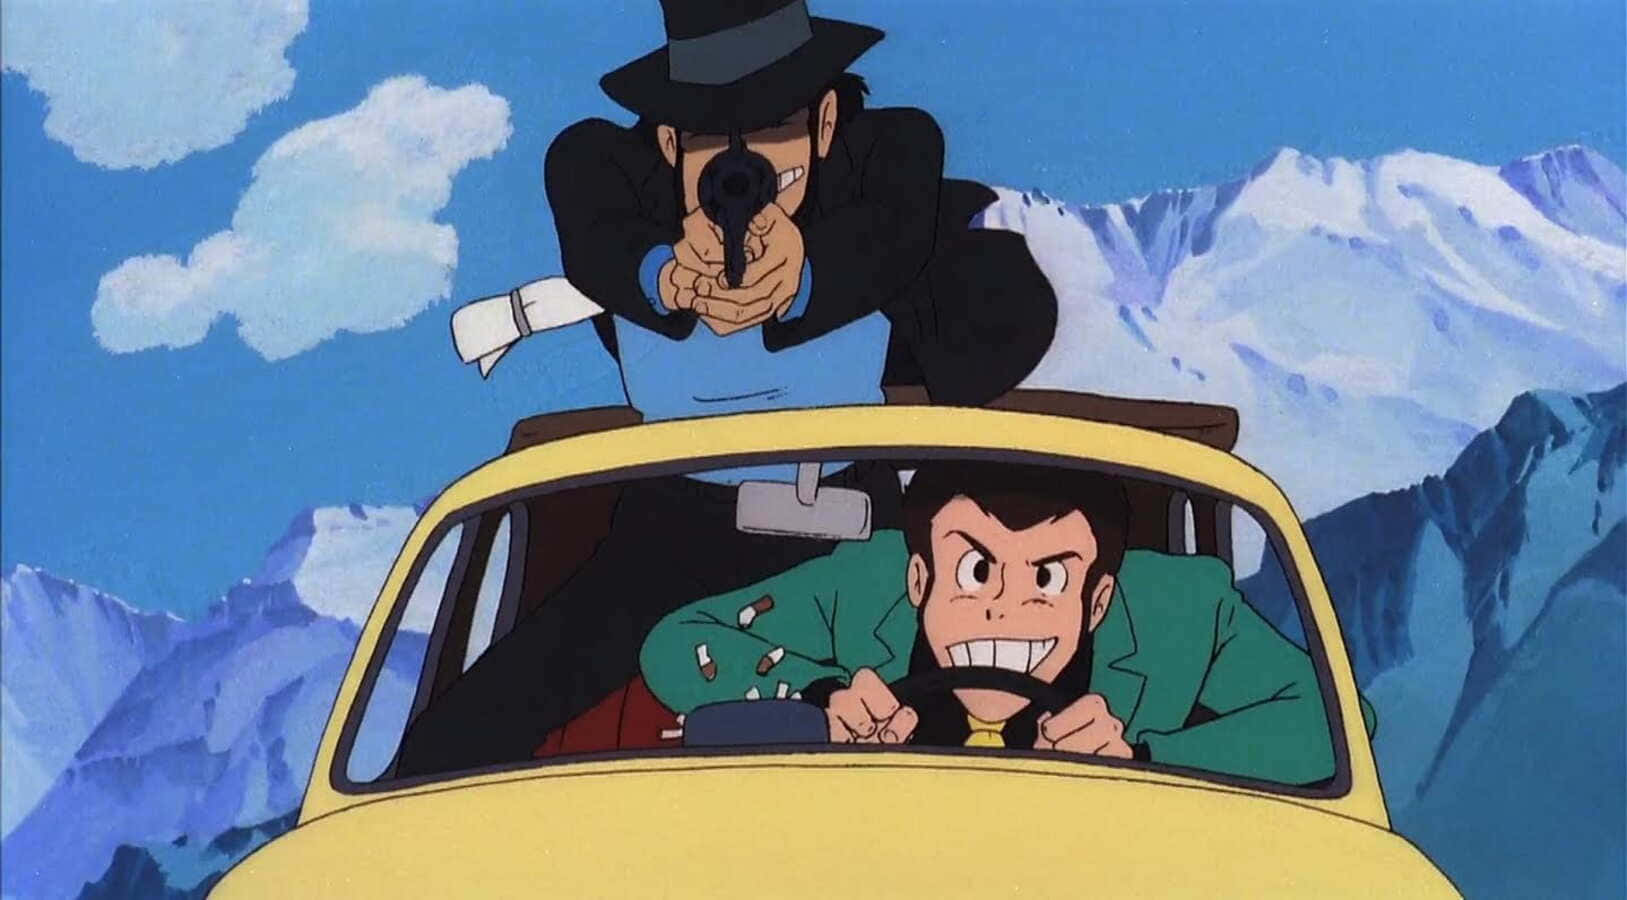 Lupin III and friends in an action-packed adventure at The Castle of Cagliostro Wallpaper